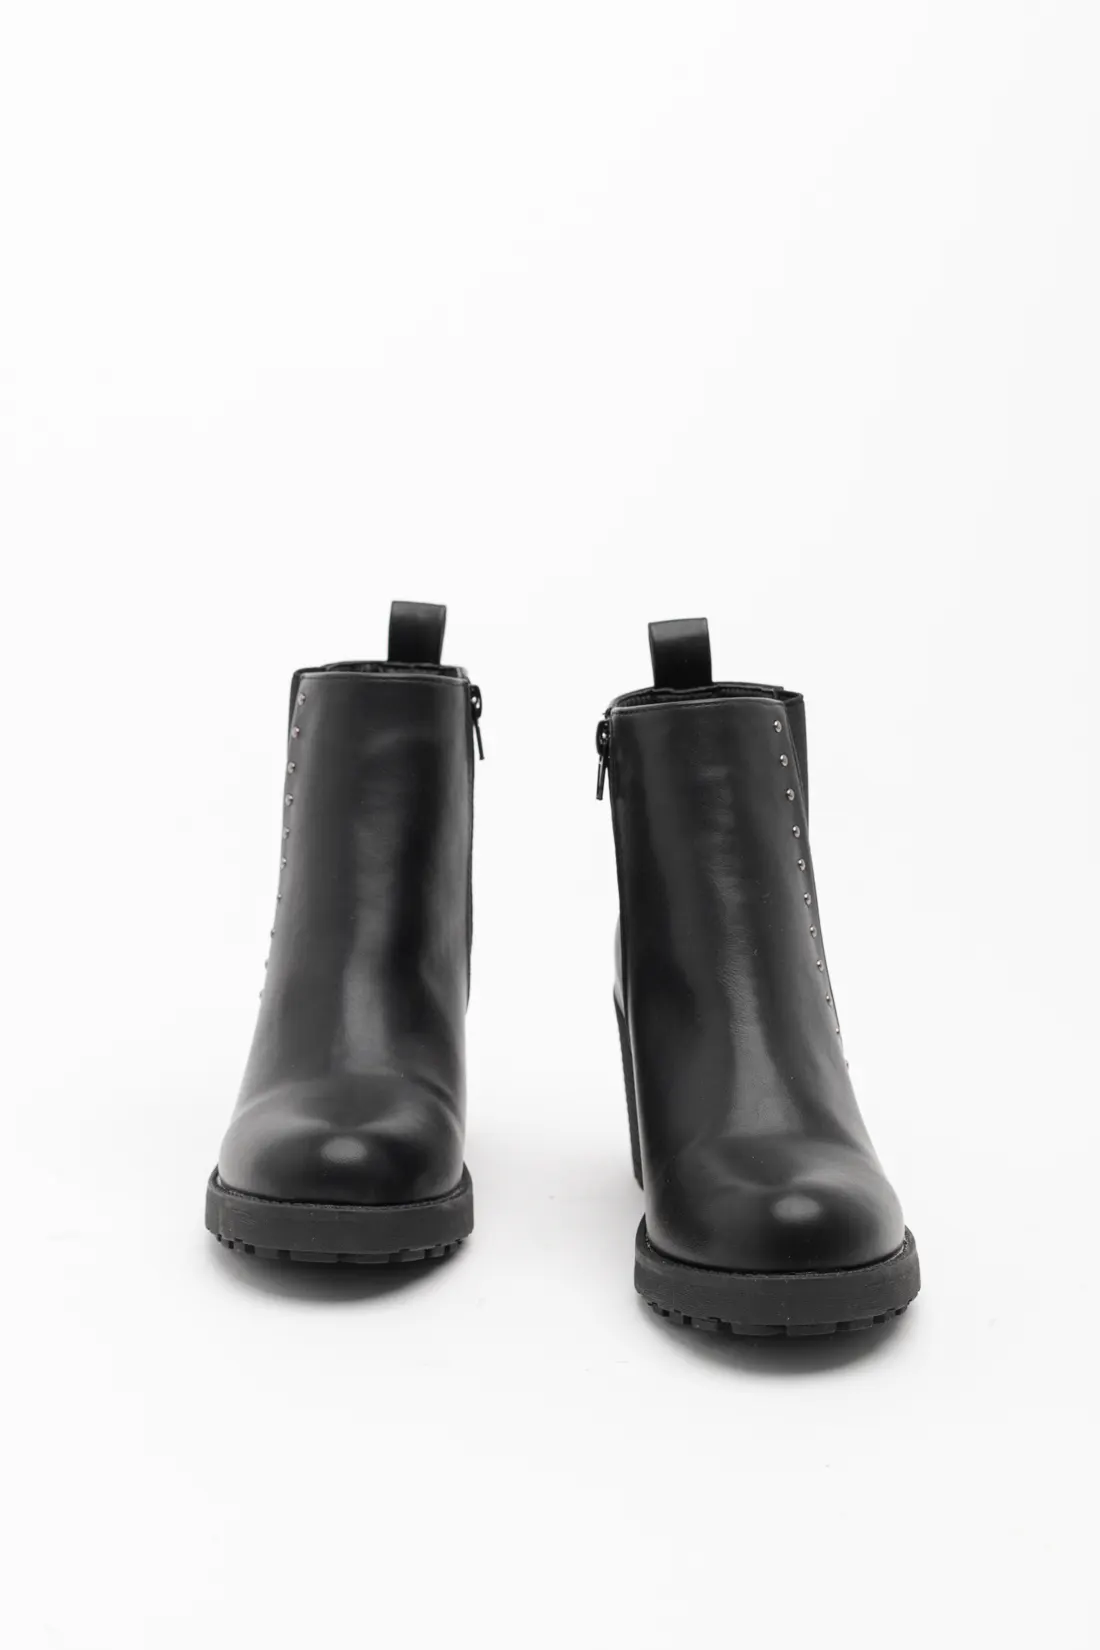 OLNAY LOW BOOT - BLACK